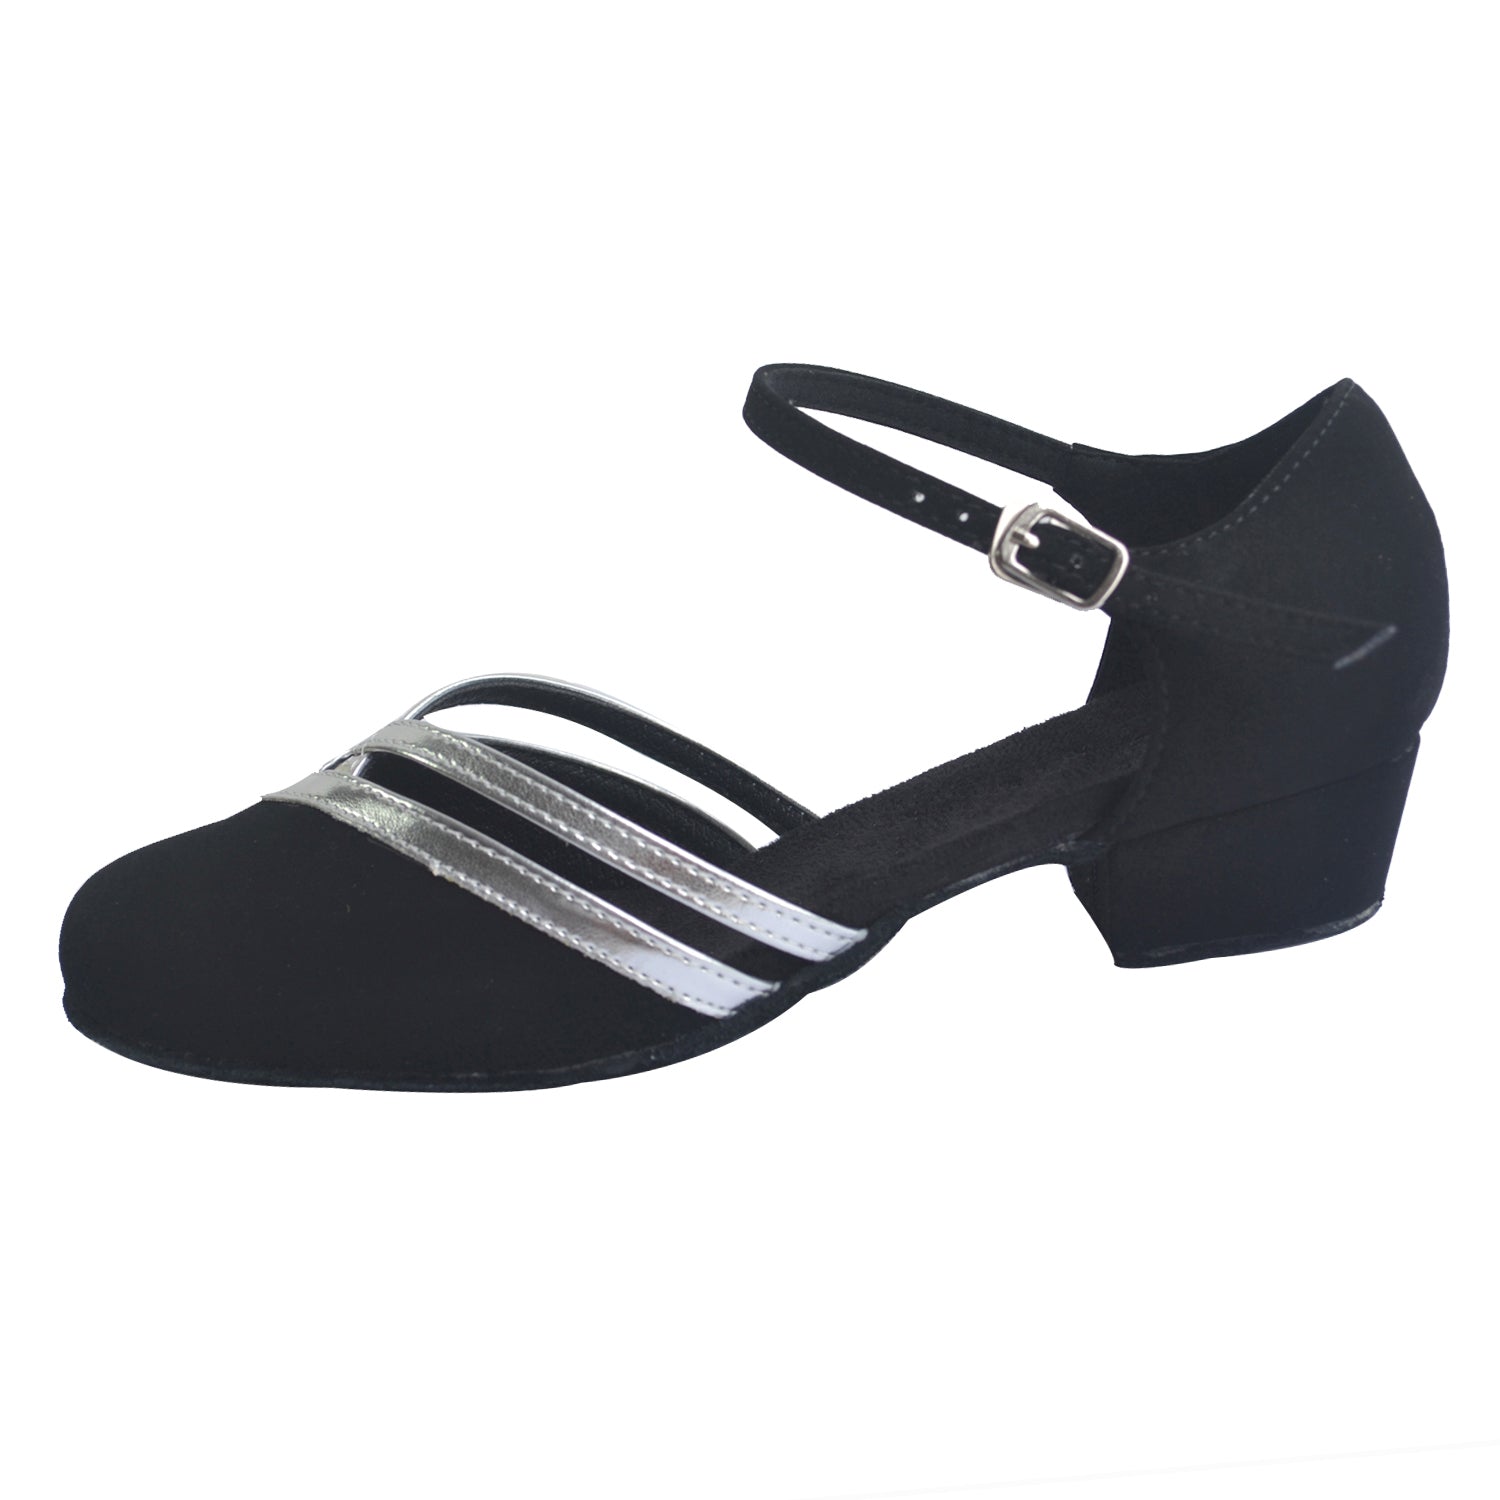 Women Ballroom Dancing Shoes with Suede Sole, Buckle-up Closed-toe Design in Black and Silver for Tango Latin Practice (PD8881B)2